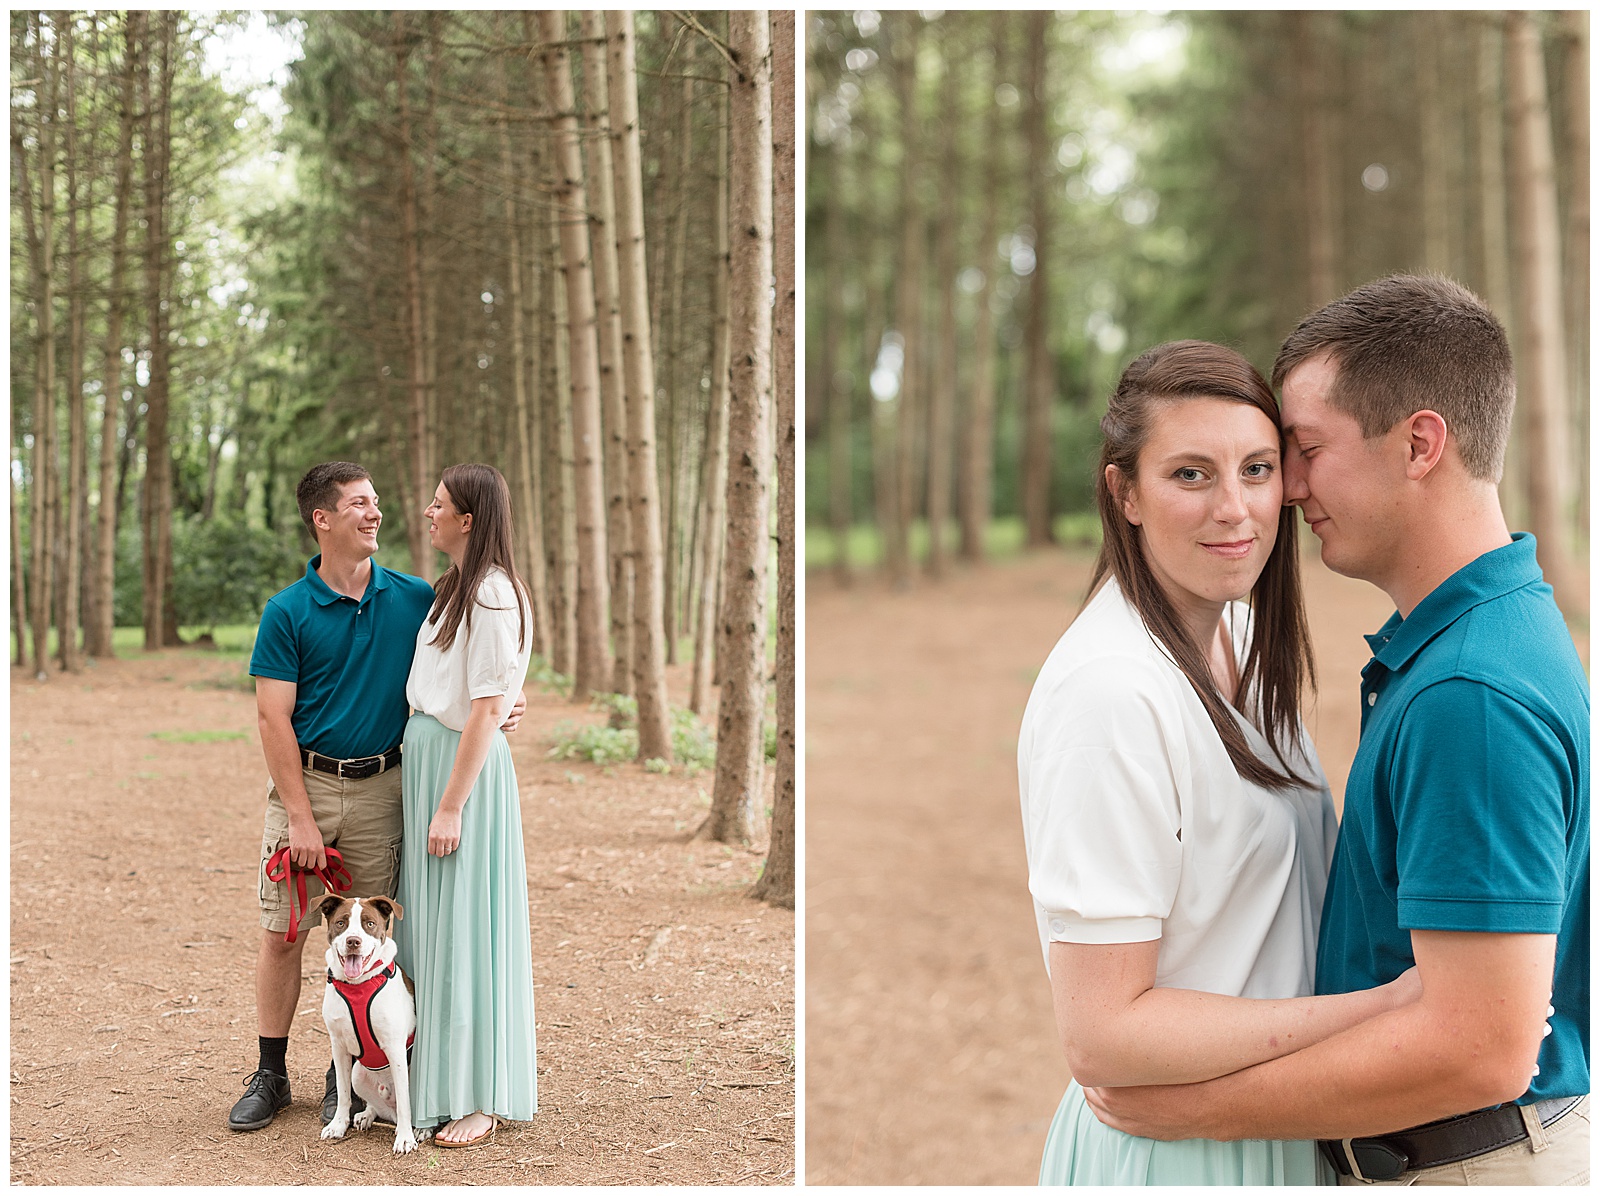 the couple is standing close together with the guy on the left and the girl on the right and she is turned slightly towards him with her left arm by her side and the guy is holding the dog's leash in his right hand as the dog is between them looking directly at the camera and the couple is looking at each other while standing on the path with the evergreen trees on both sides of them at Overlook Park in Lancaster, PA, close up photo of the couple with the girl on the left side looking at the camera and slightly smiling with the guy on the right resting his head and face against the left side of her face and his eyes are closed and the couples has their arms around each other's waists while standing on the path with the rows of evergreen trees around them on an overcast evening at Overlook Park in Lancaster, PA